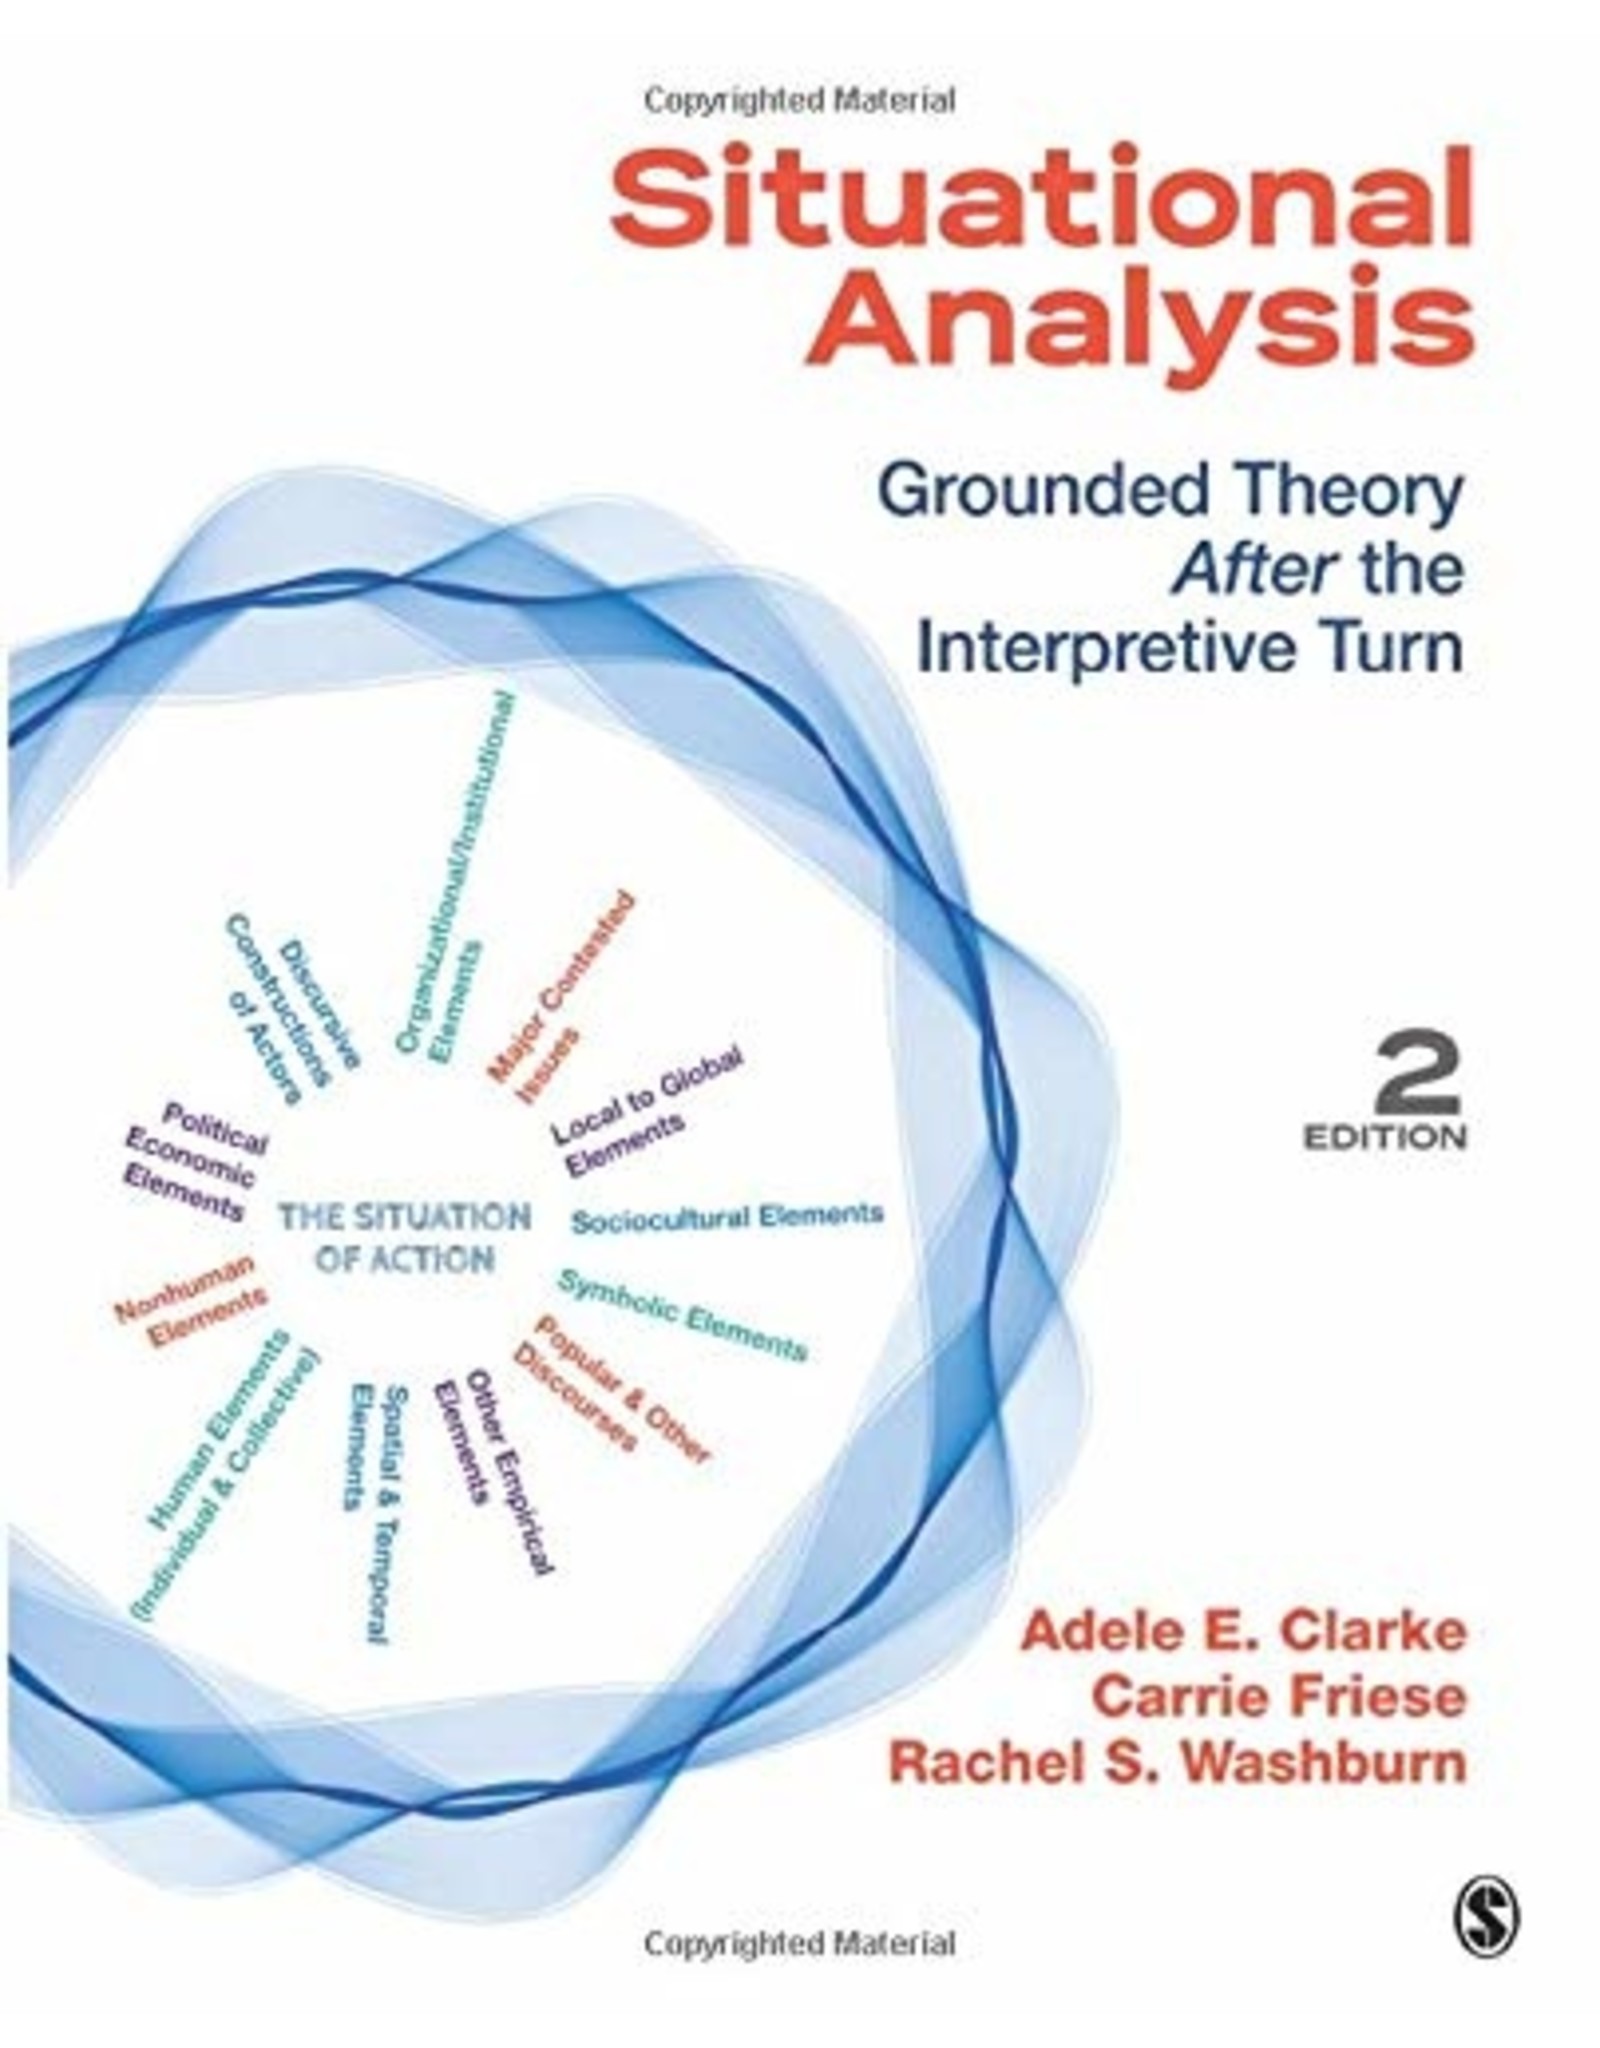 Literature Situational Analysis: Grounded Theory After the Interpretive Turn (2e)